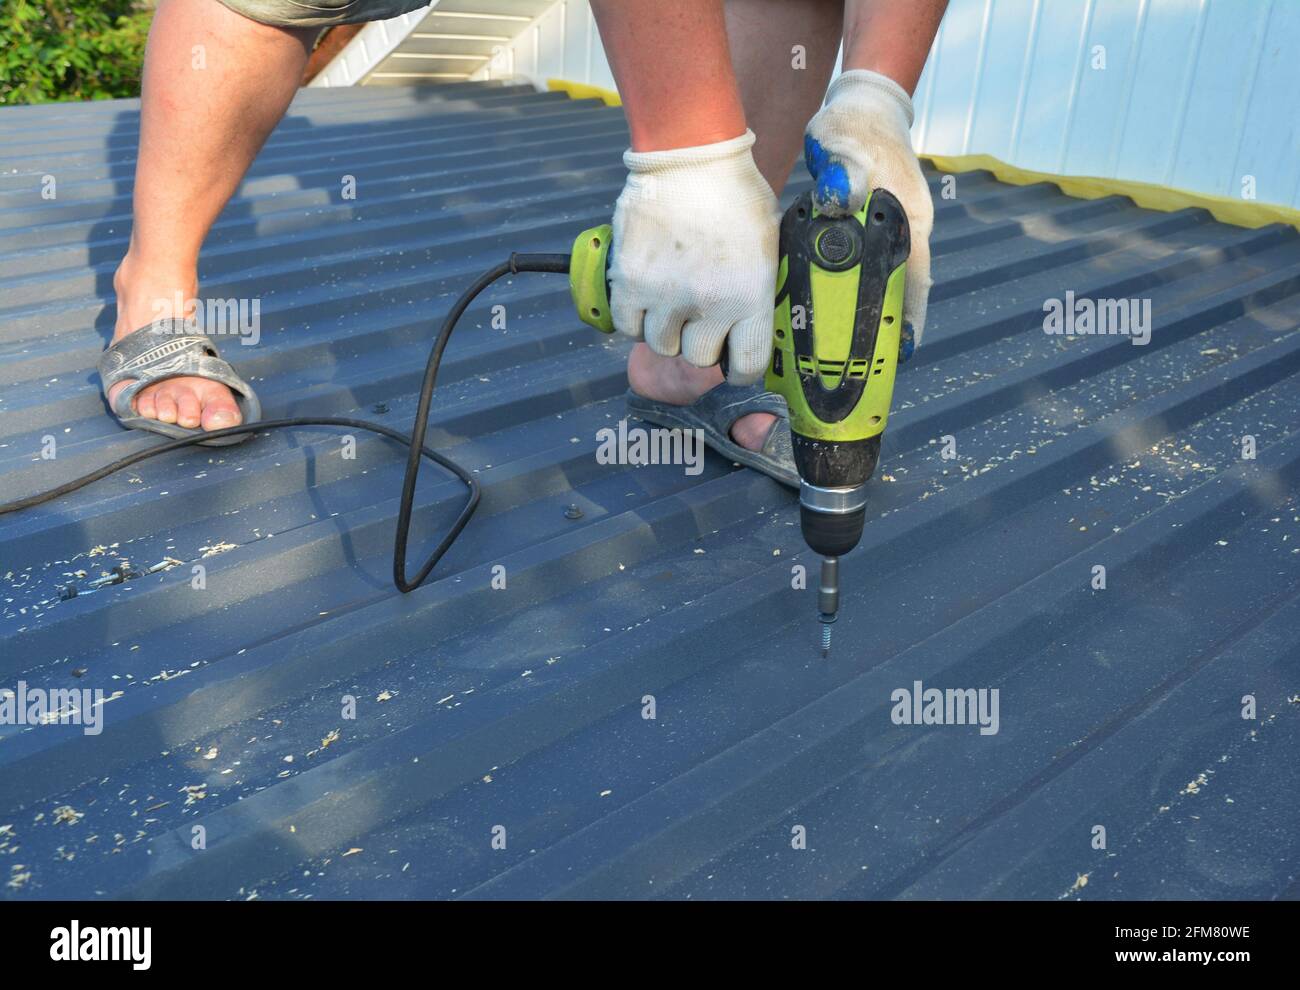 Roofing construction: a roofing contractor is installing metal roofing sheets, metal roof tiles driving screws with an electric screwdriver. Stock Photo